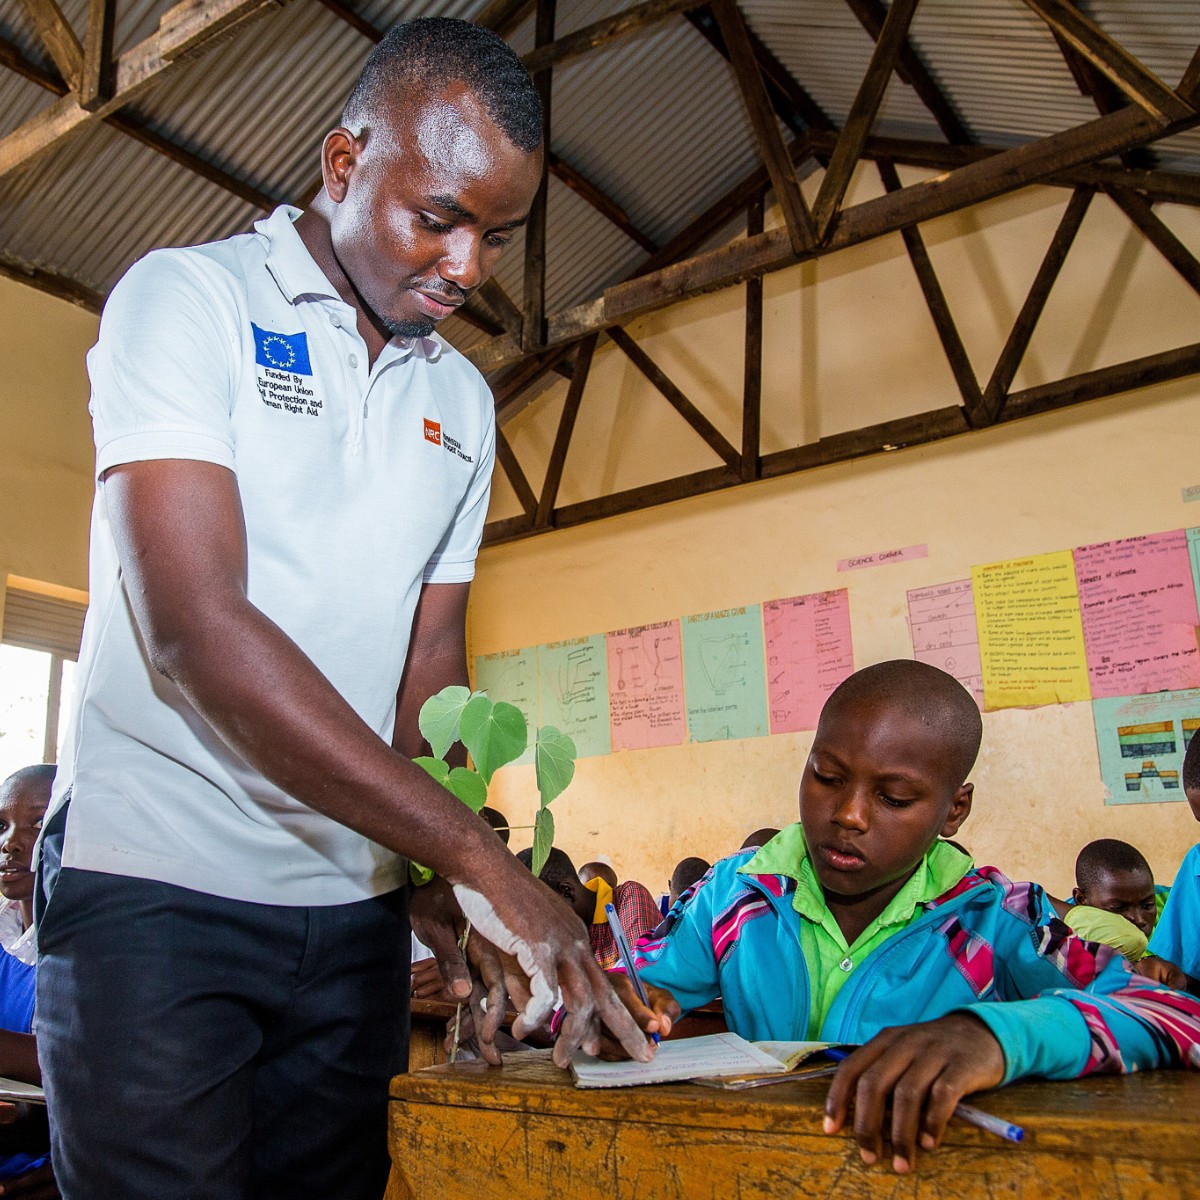 #Uganda: On #EuropeDay, we extend our gratitude to our European partners for their support & commitment to our work in Uganda. Your contributions have made a significant impact on the lives of refugees & displaced communities. Thank you for your continued partnership.